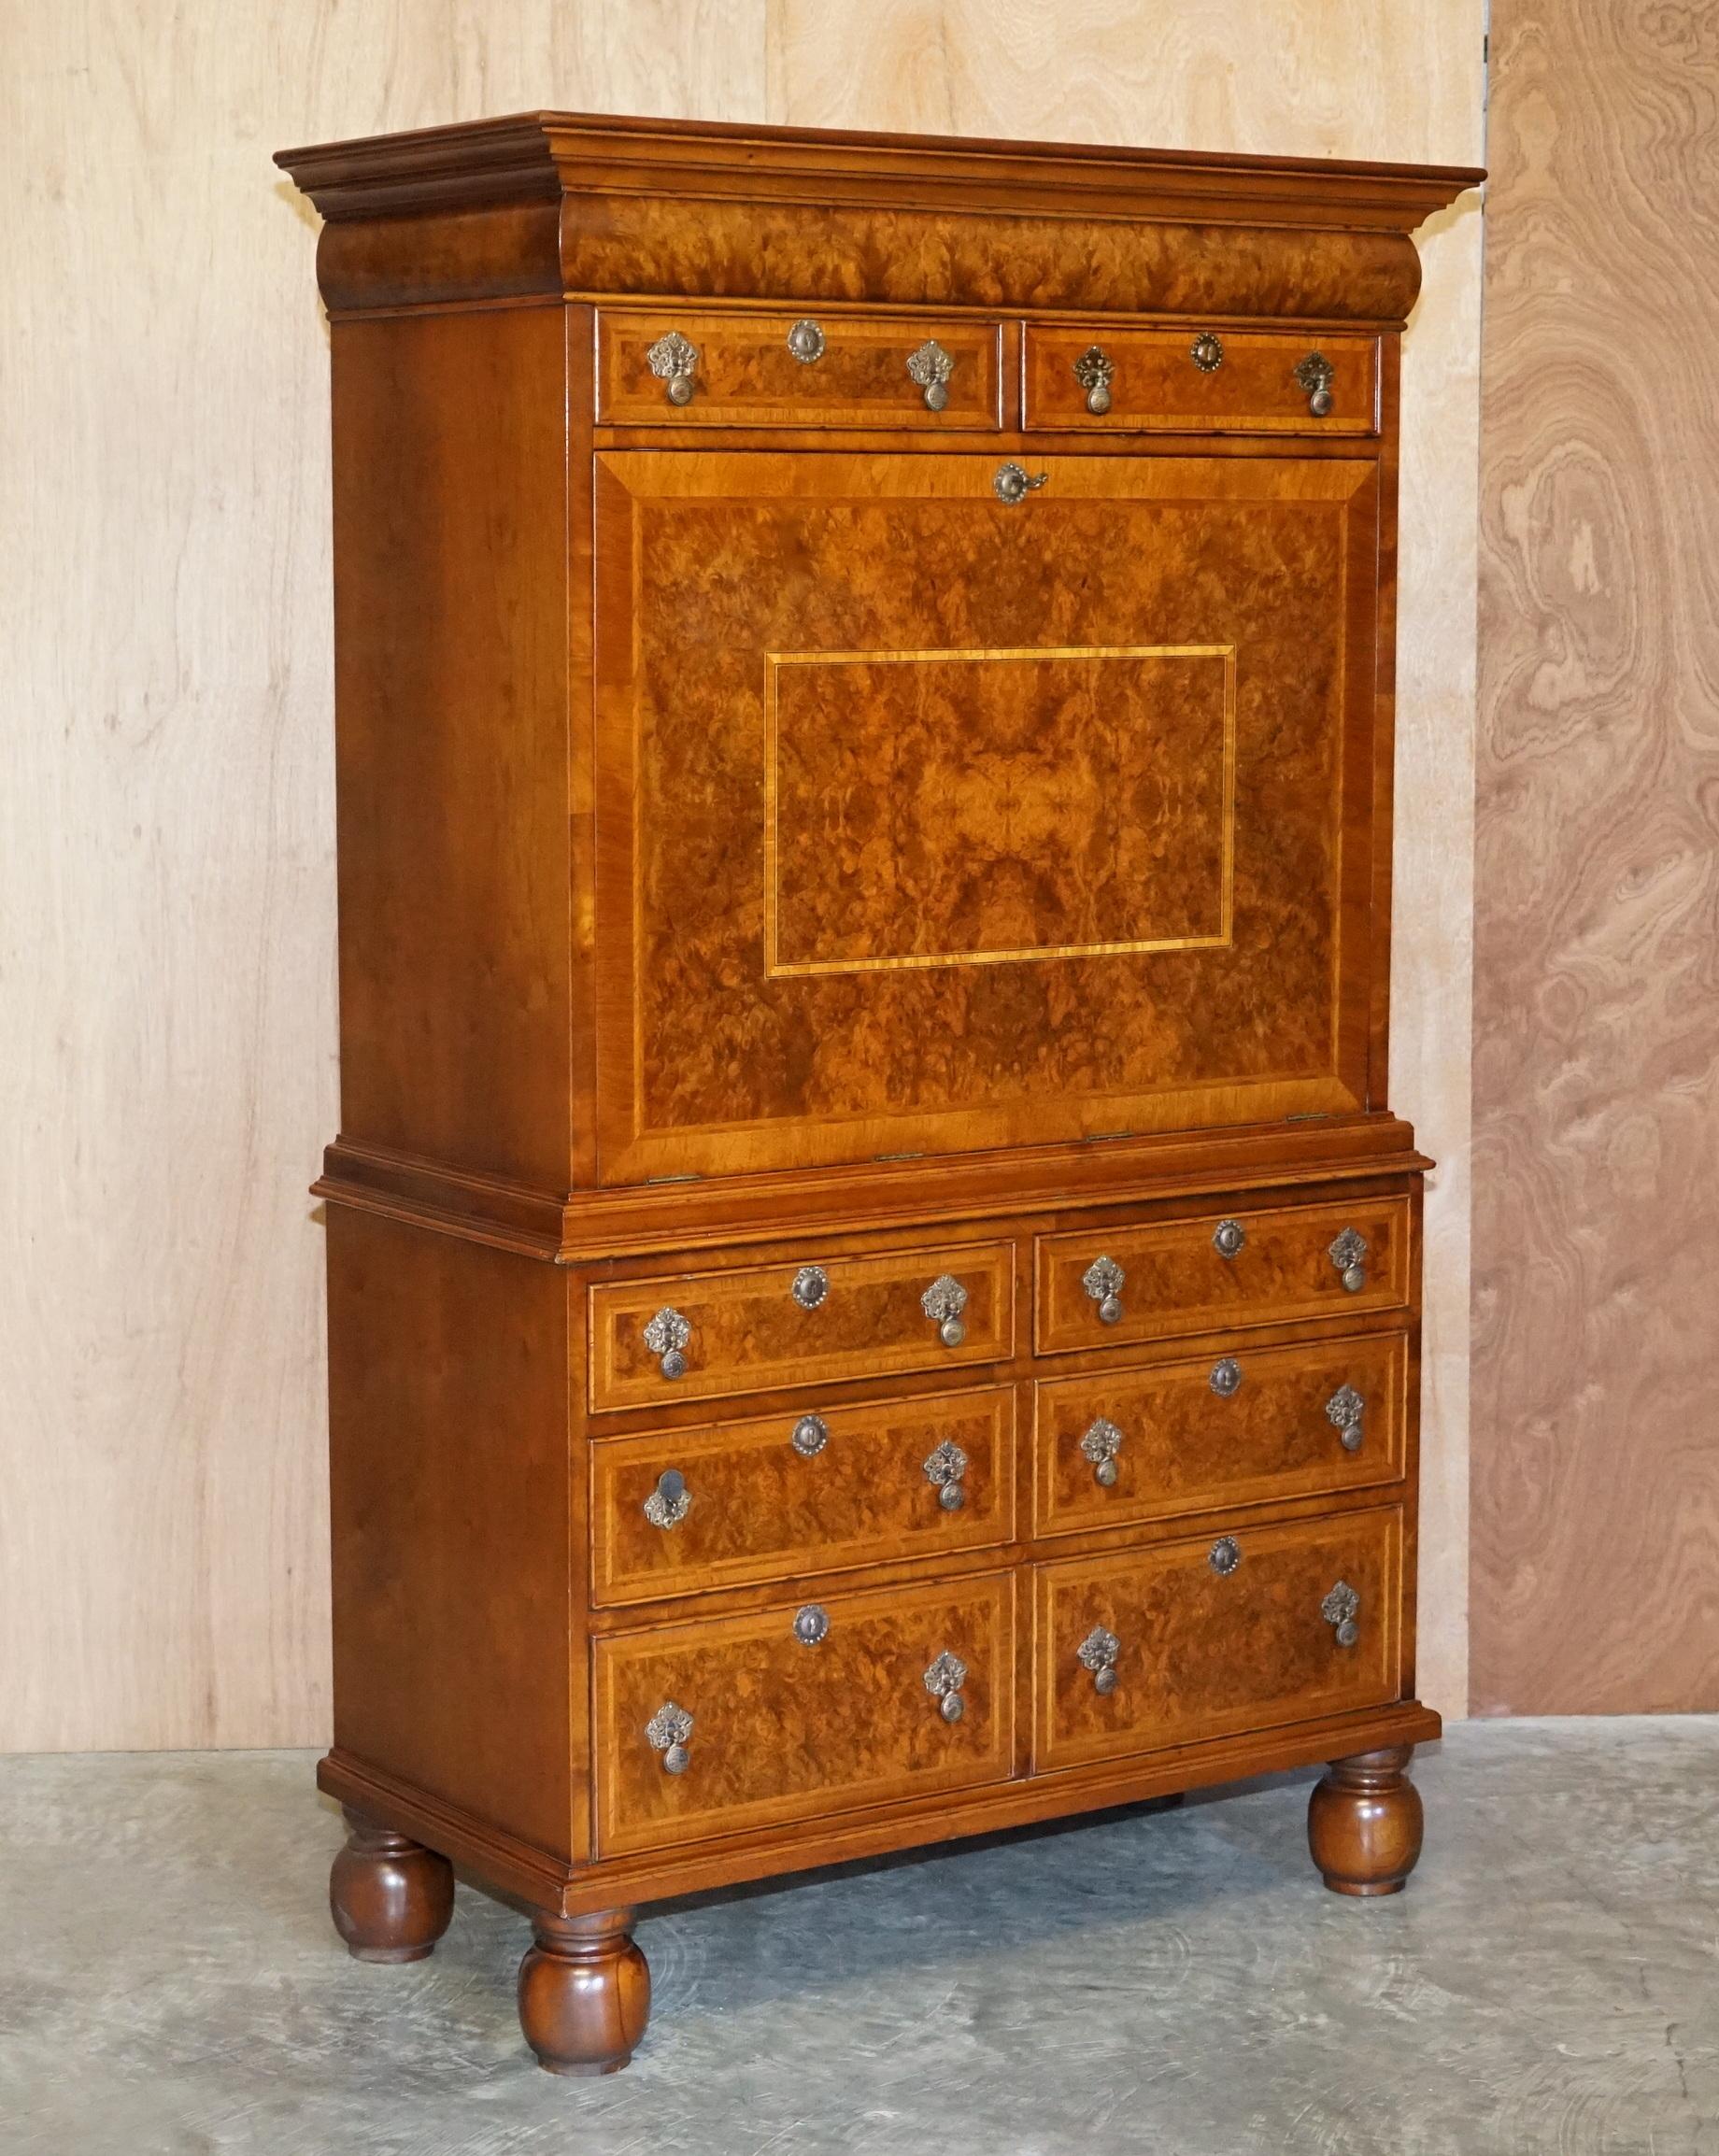 We delighted to offer this 1 of 2 lovely Brights of Nettlebed William & Mary style cabinet in burr walnut

As mentioned I have a pair of these, this one has an arrangement of drawers and drop front desk section, the other has a media cupboard to